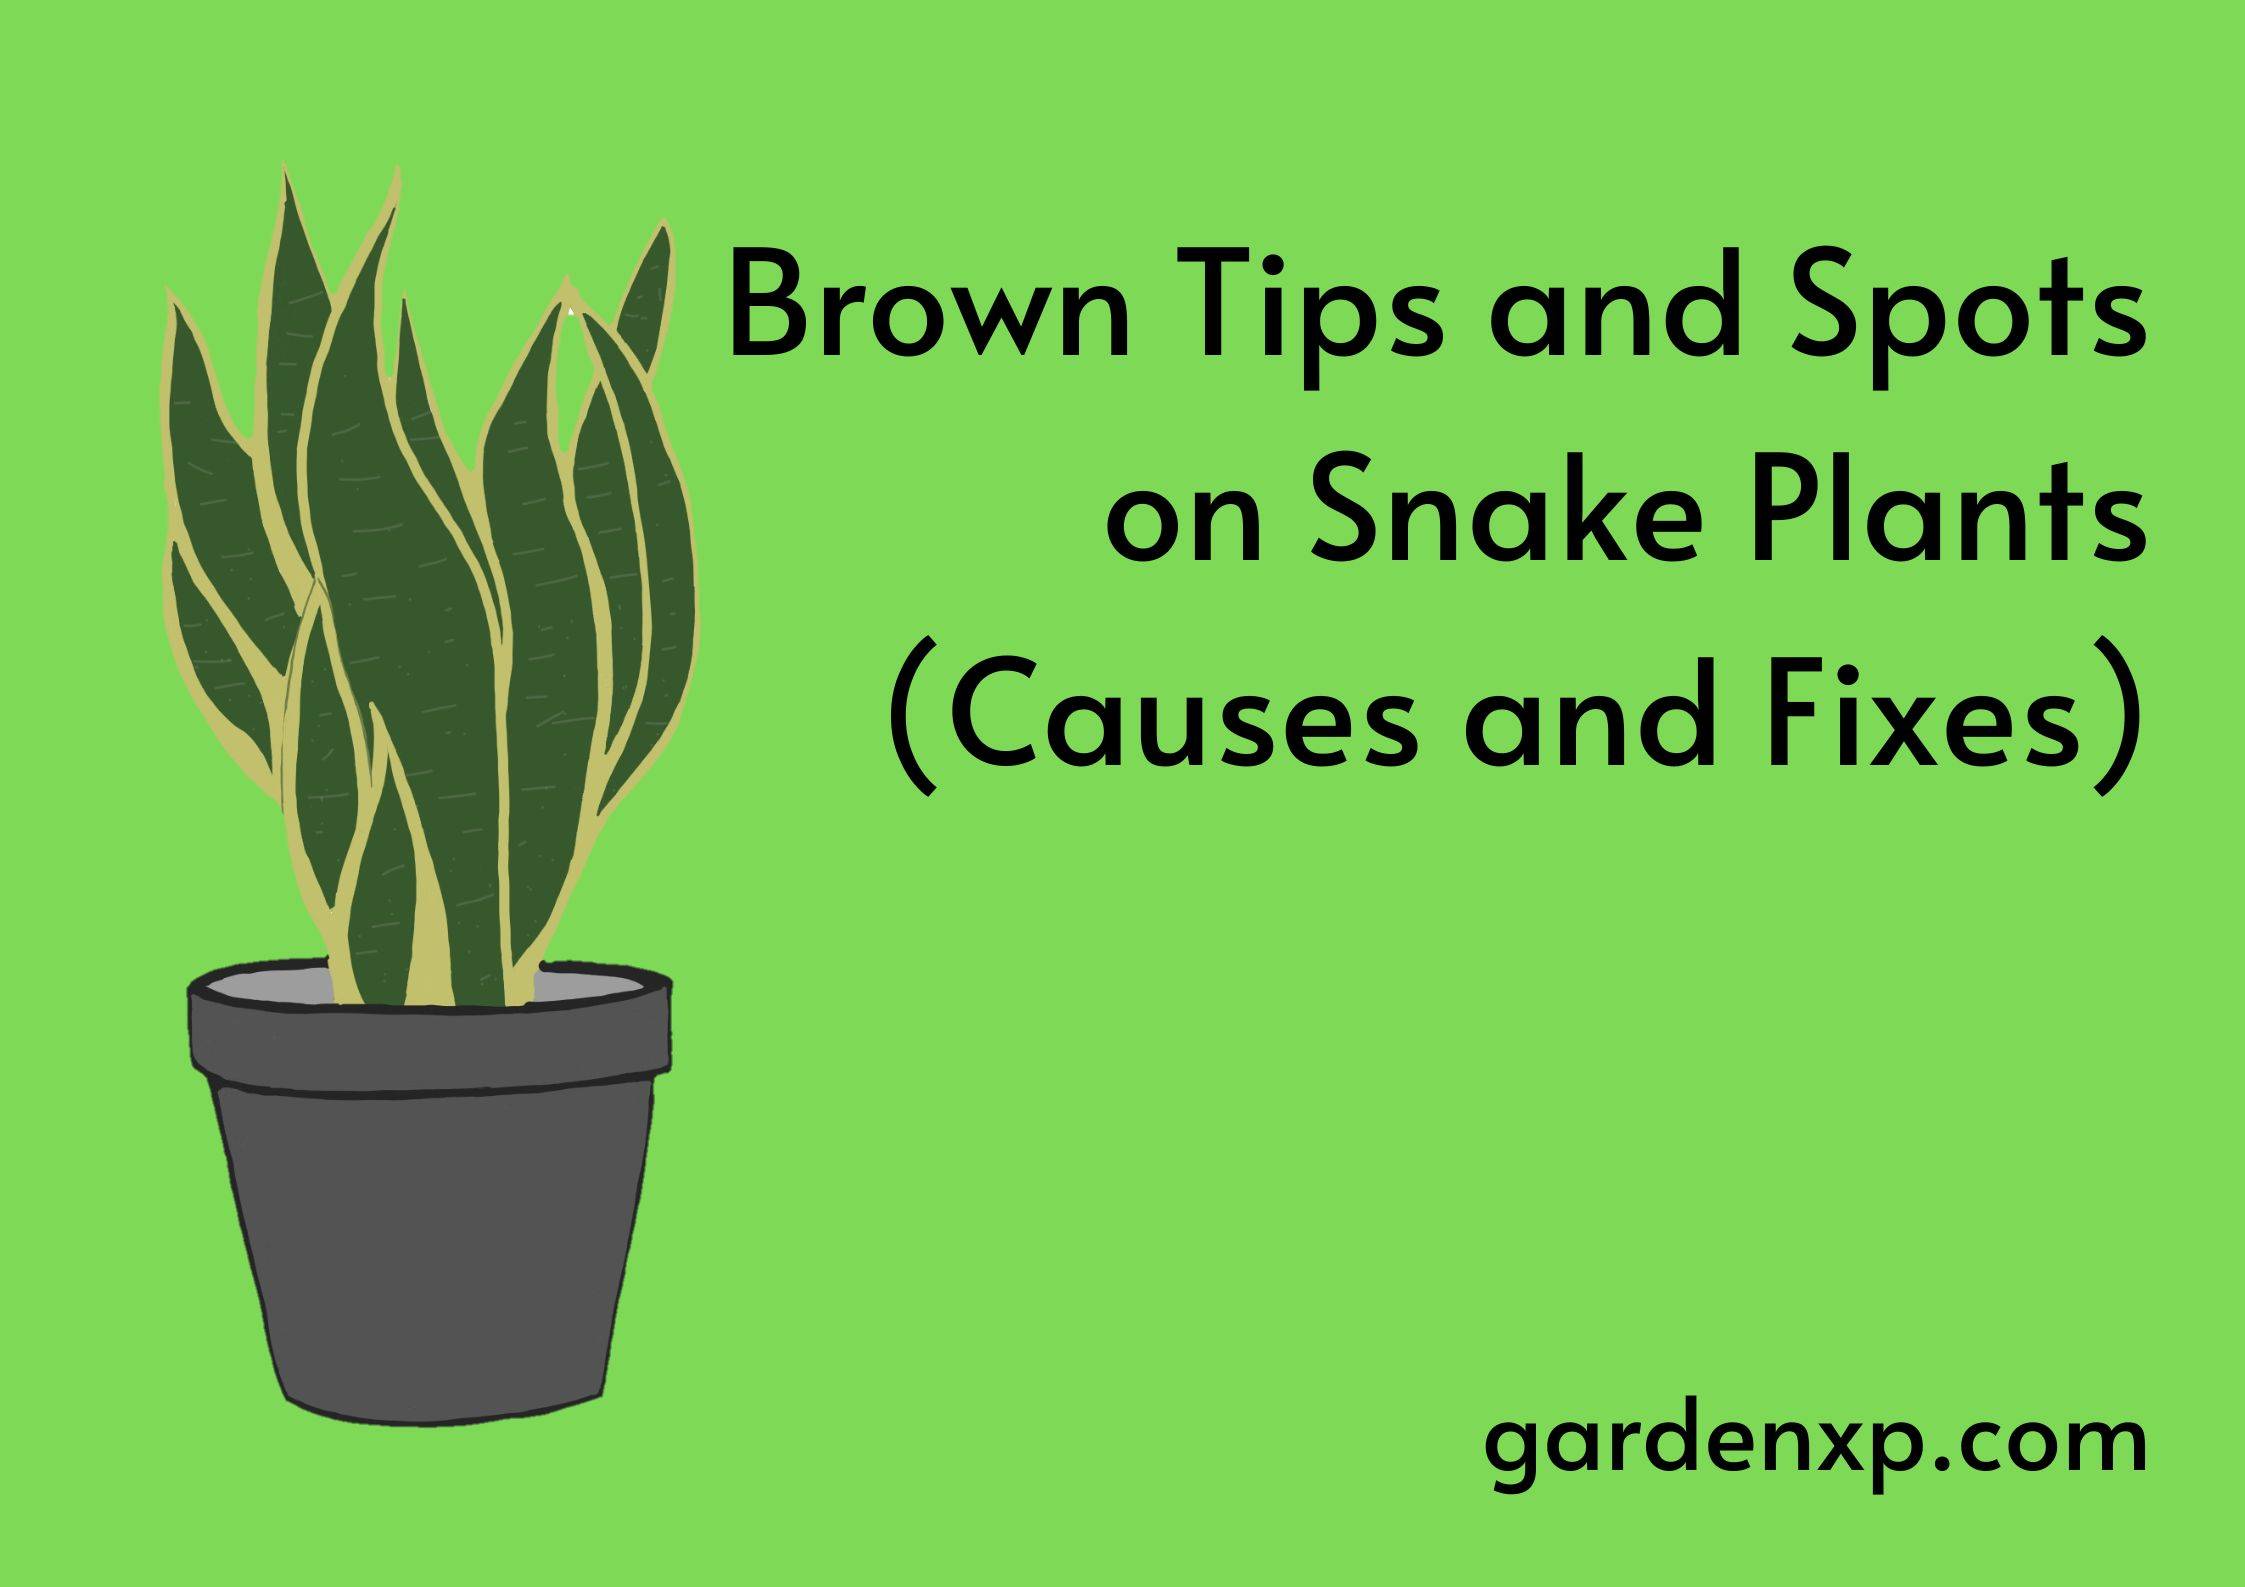 Brown Tips and Spots on Snake Plants (Causes and Fixes)